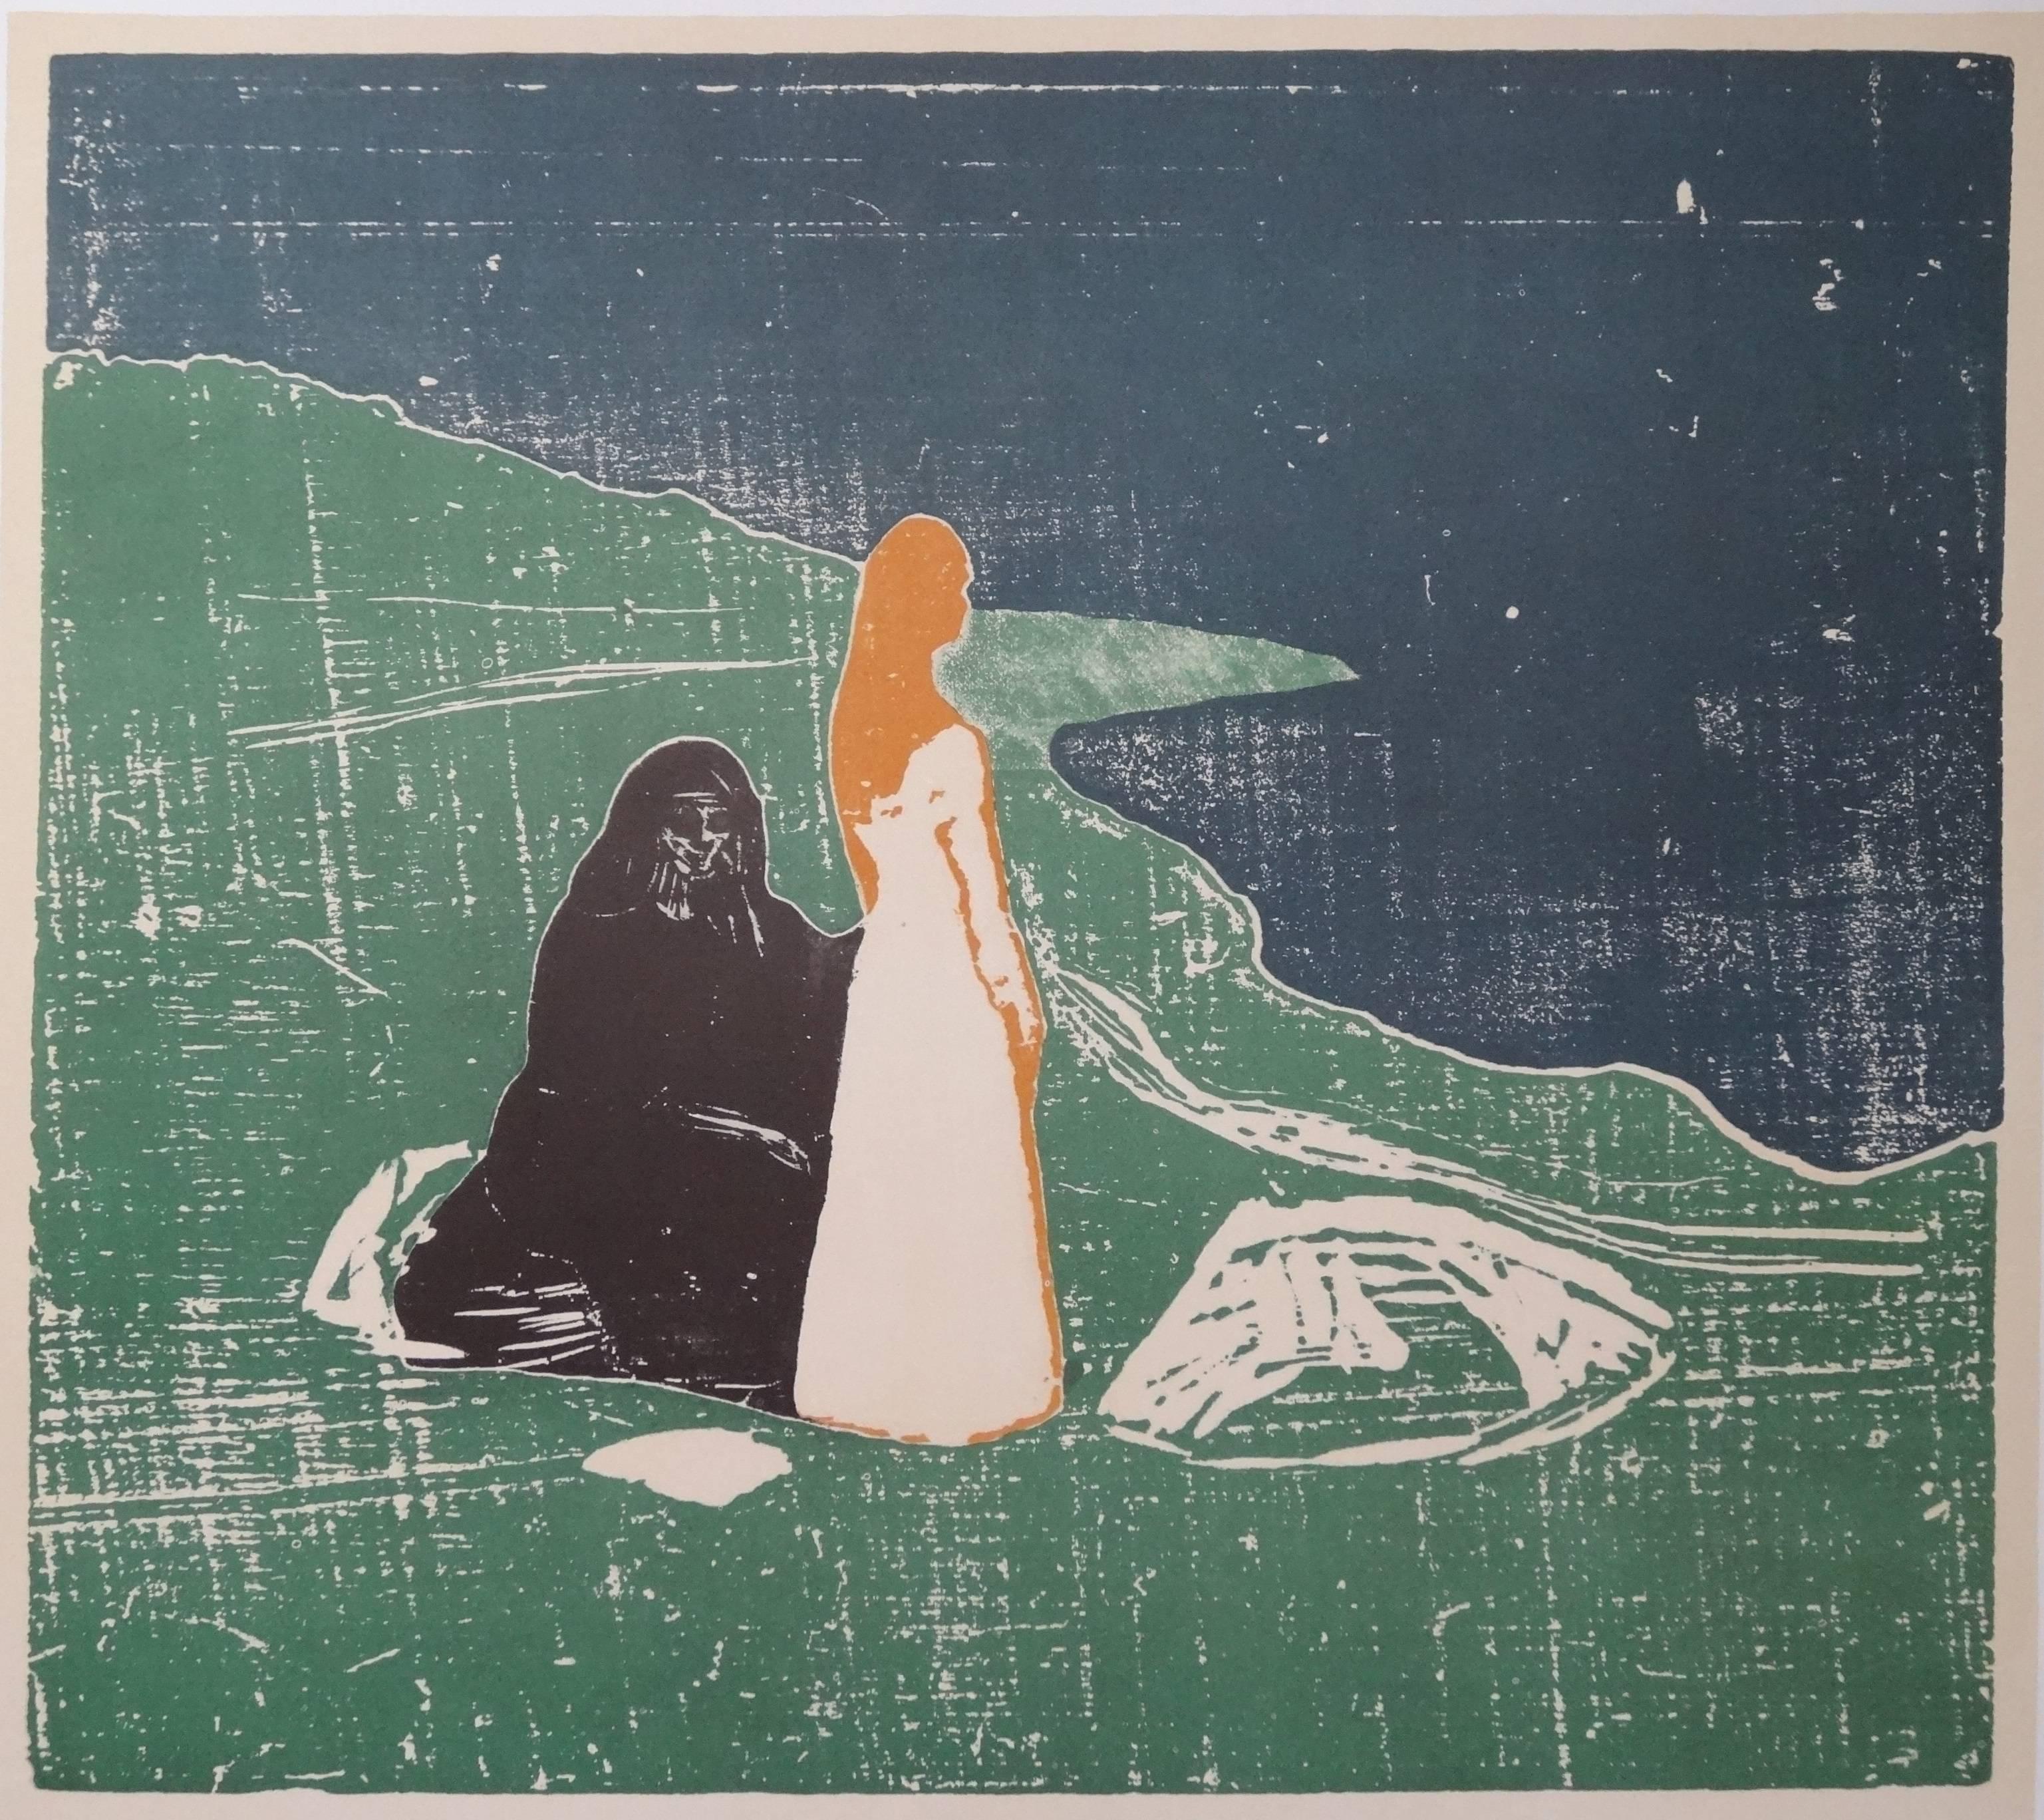 Edvard Munch: Lithographs, Etchings, Woodcuts - Los Angeles County Museum - Print by (After) Edvard Munch